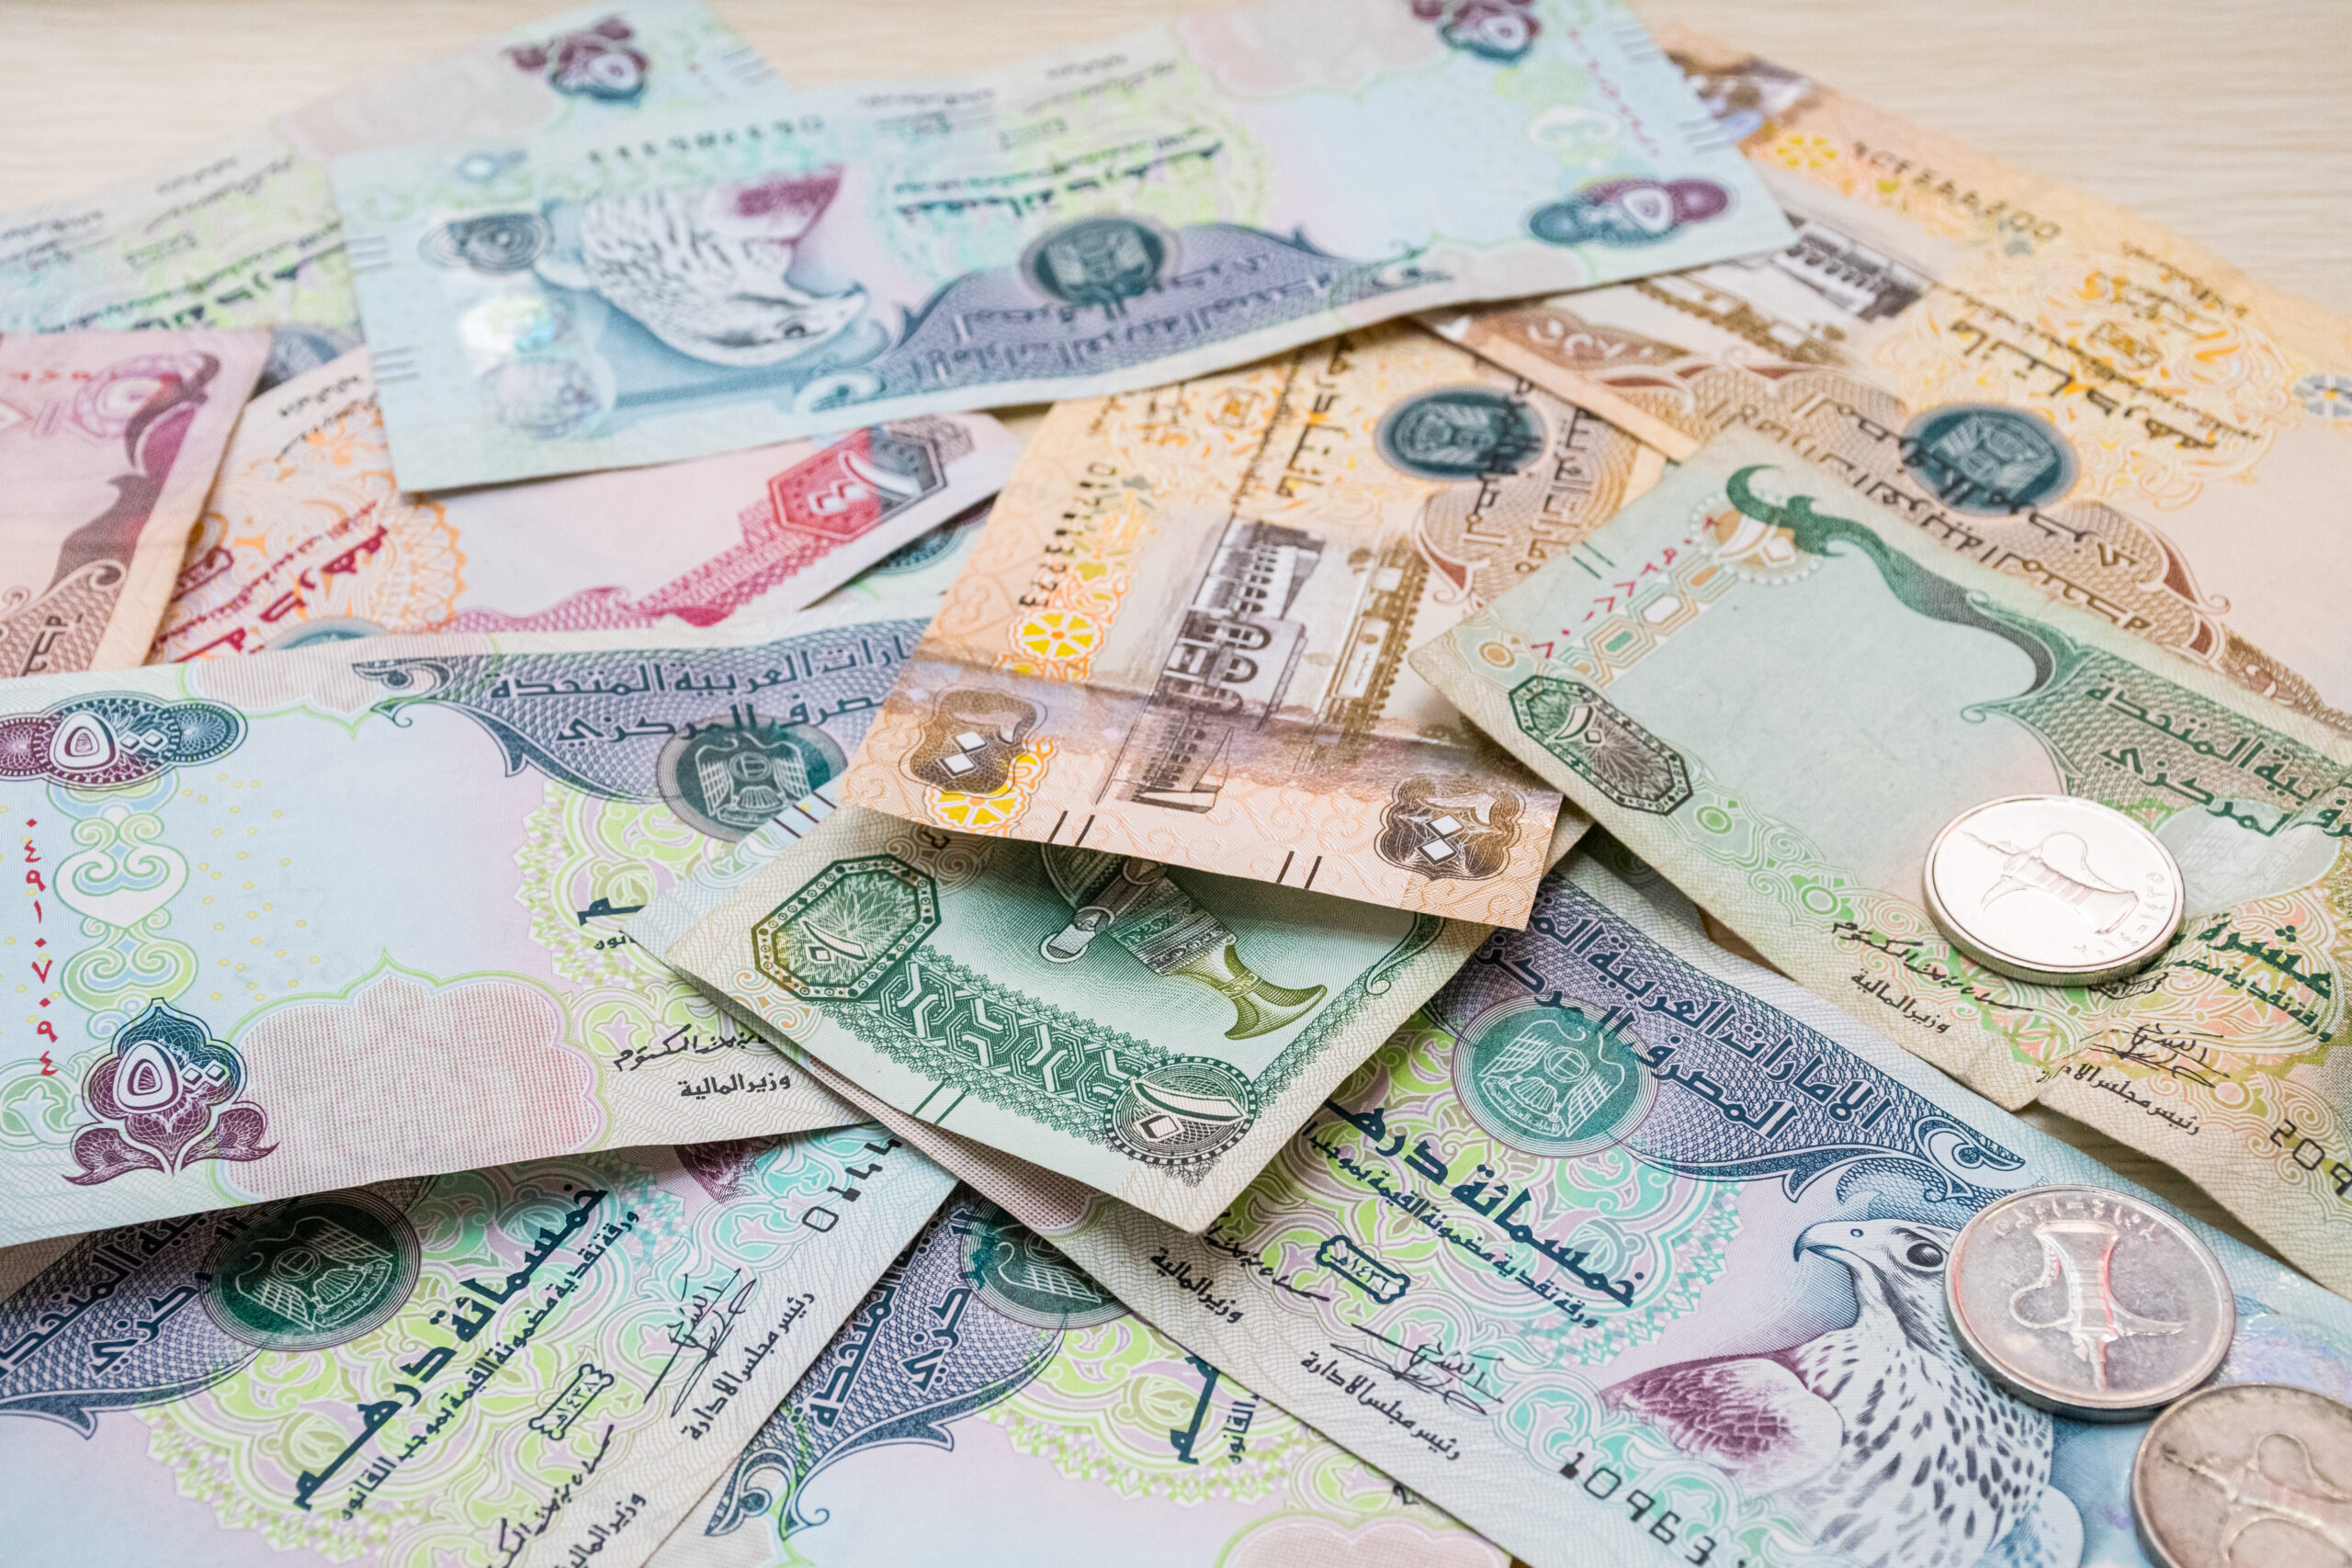 Money in Dubai - UAE currency notes and coins